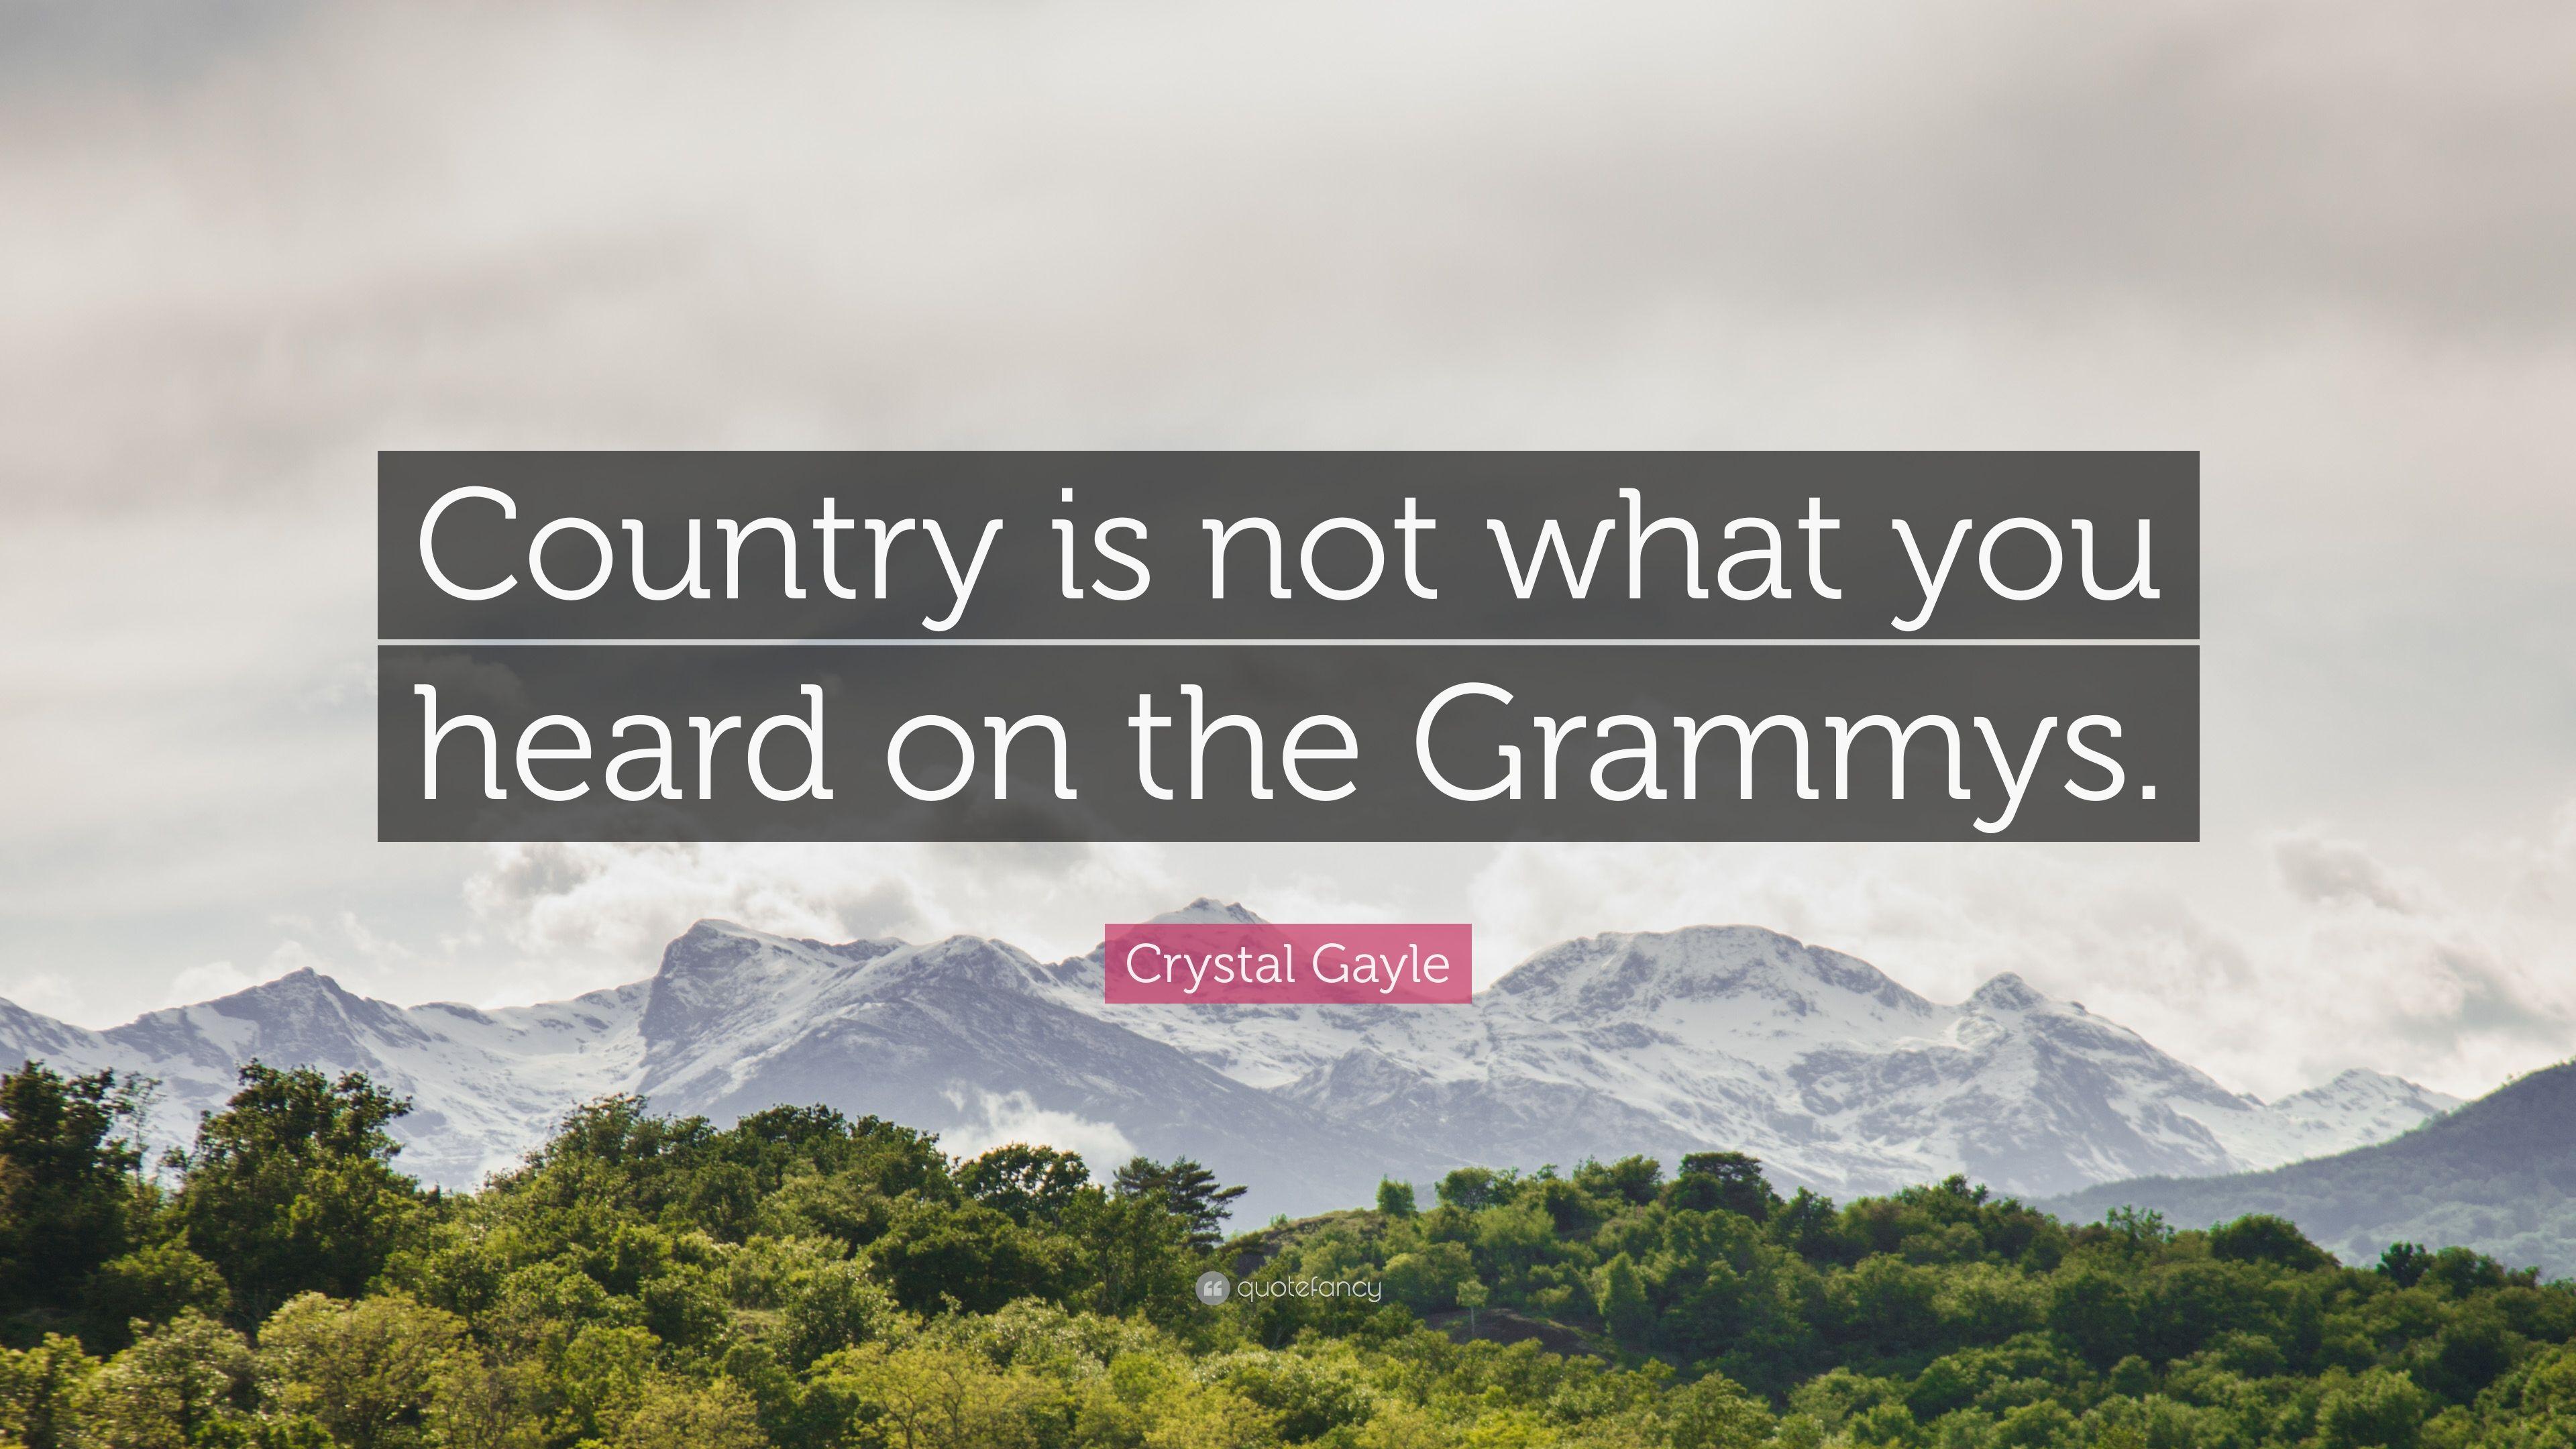 Crystal Gayle Quote: “Country is not what you heard on the Grammys